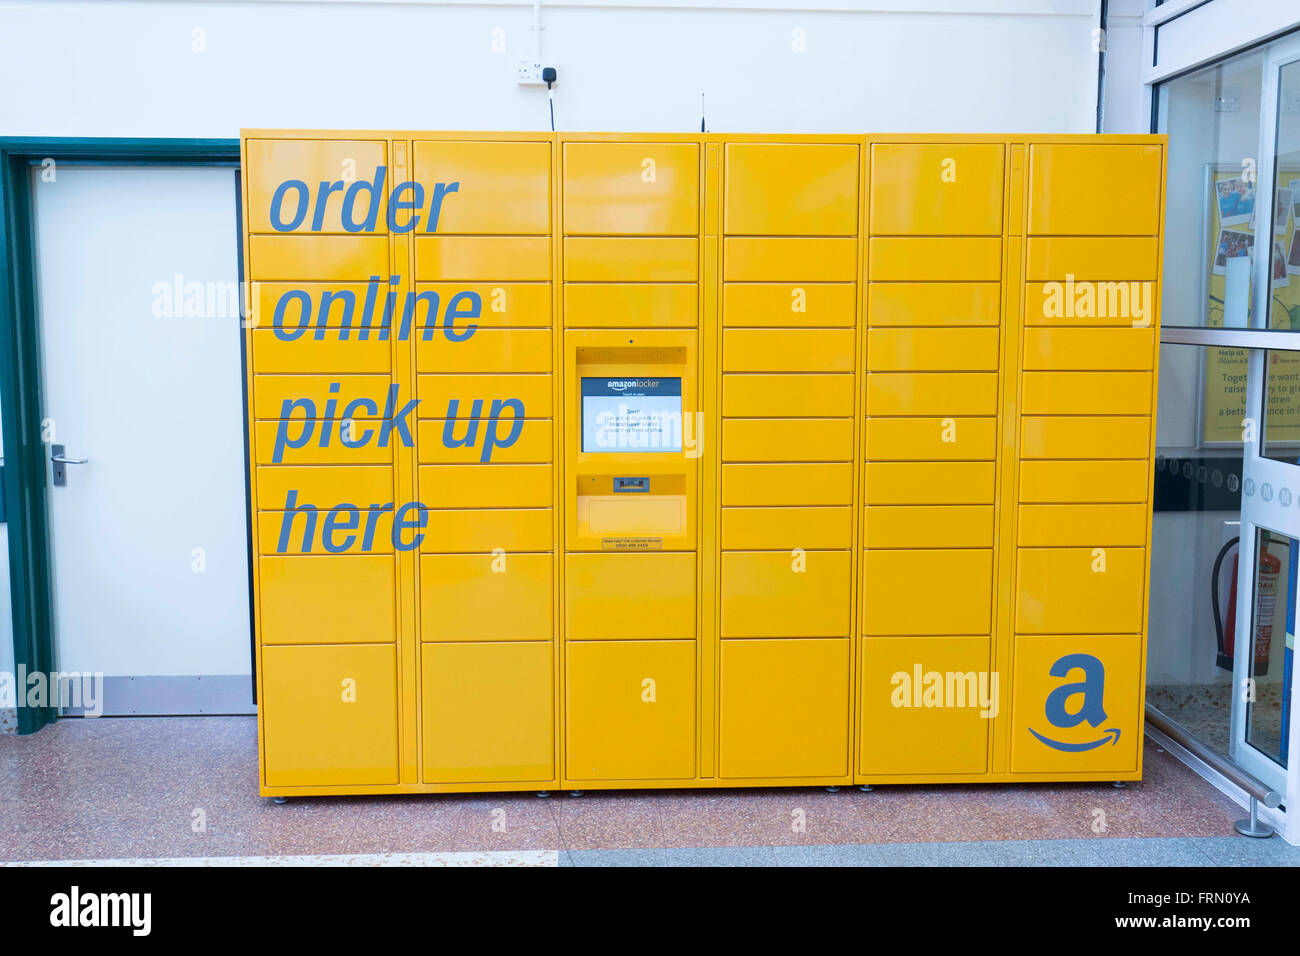 Amazon online order pick up collection point in a Morrisons supermarket Stock Photo